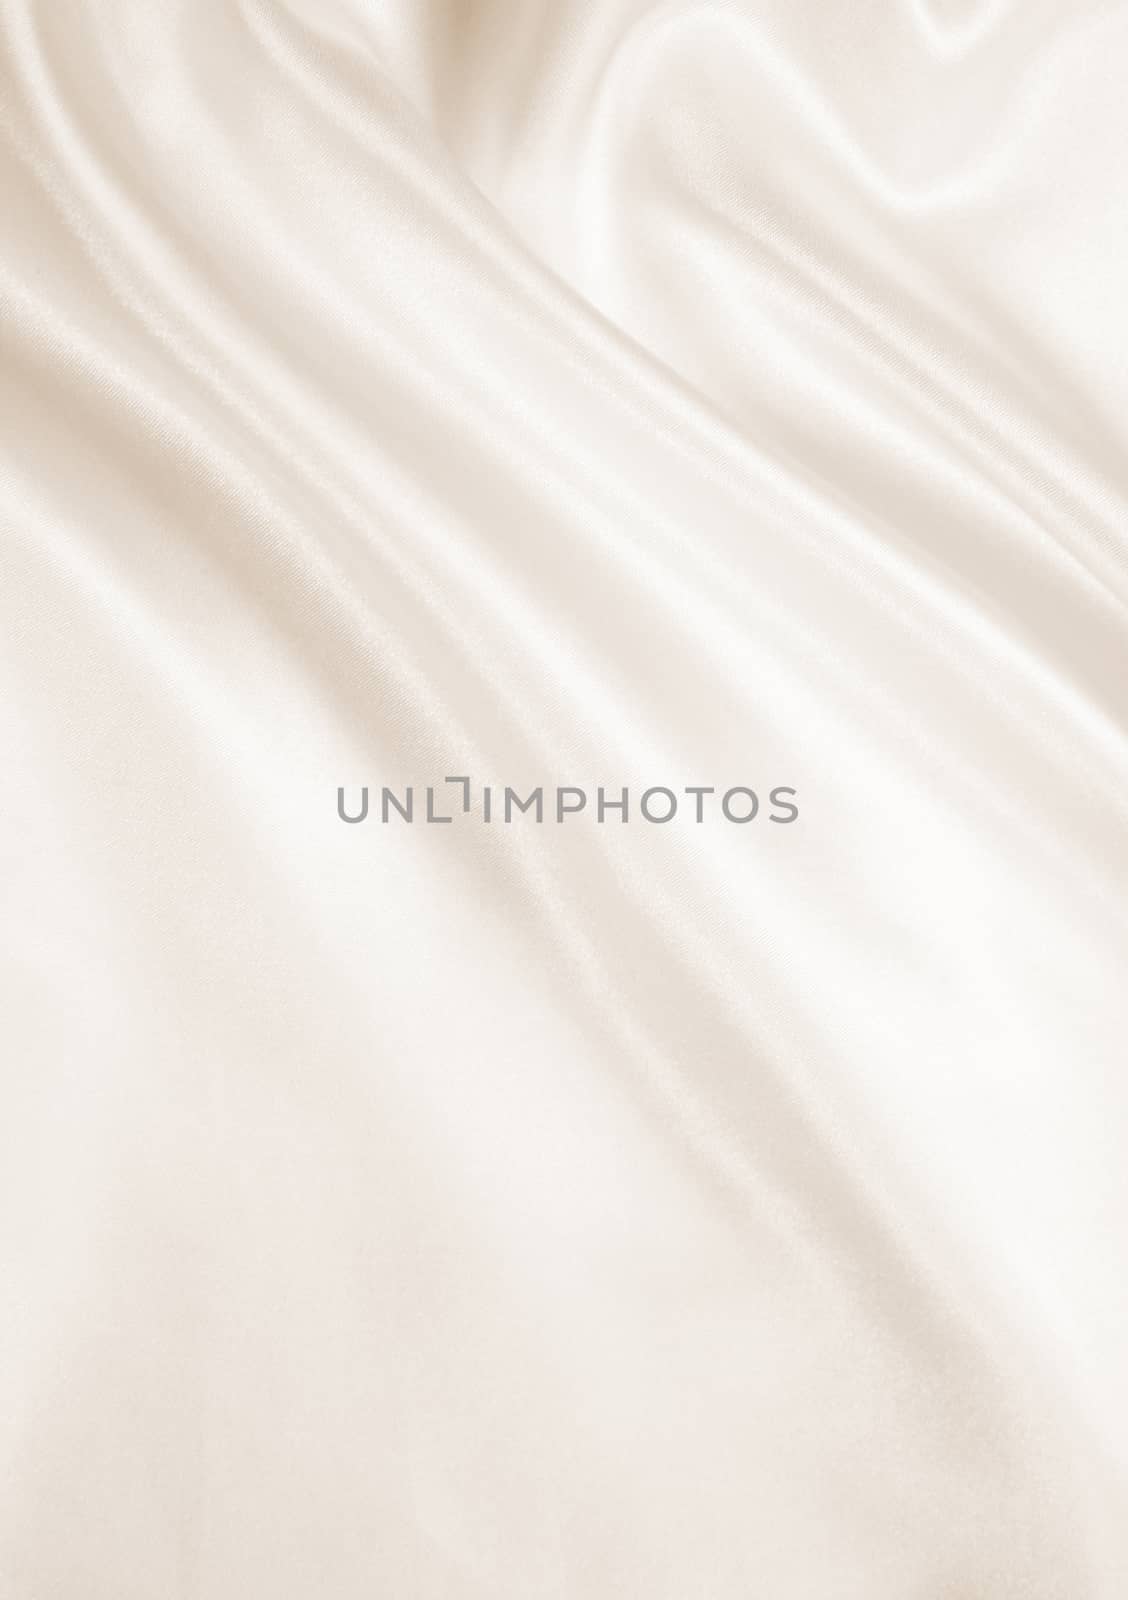 Smooth elegant golden silk or satin texture as background. In Se by oxanatravel